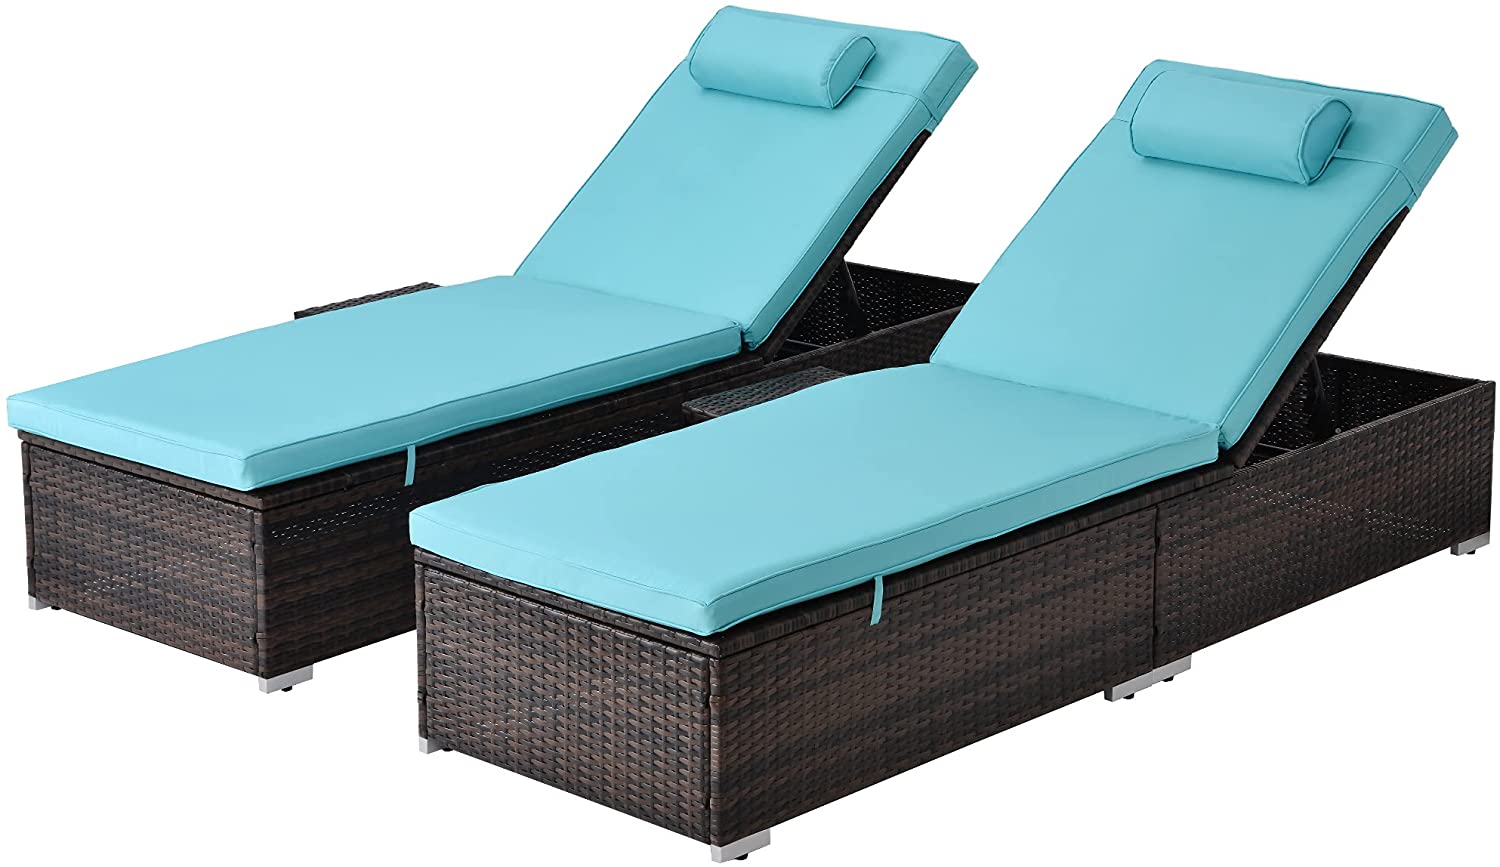 Outdoor PE Wicker Chaise Lounge, 2 Piece Patio Brown Rattan Reclining Chair Furniture Set, Adjustable Backrest Recliners with Side Table and Comfort Head Pillow(Blue) - image 1 of 18